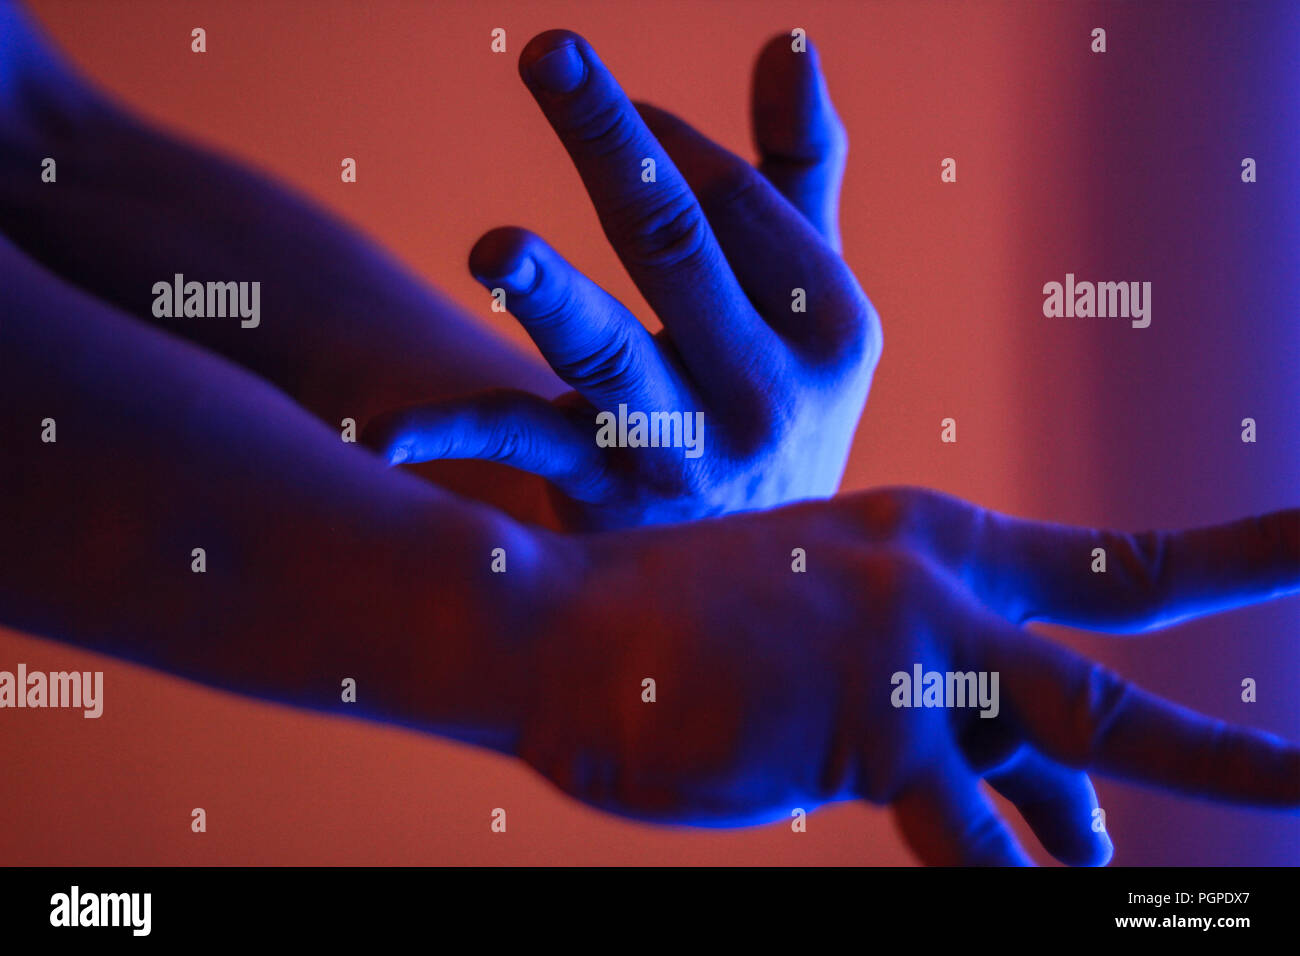 Human hands in red and blue color neon fluorescent light Stock Photo